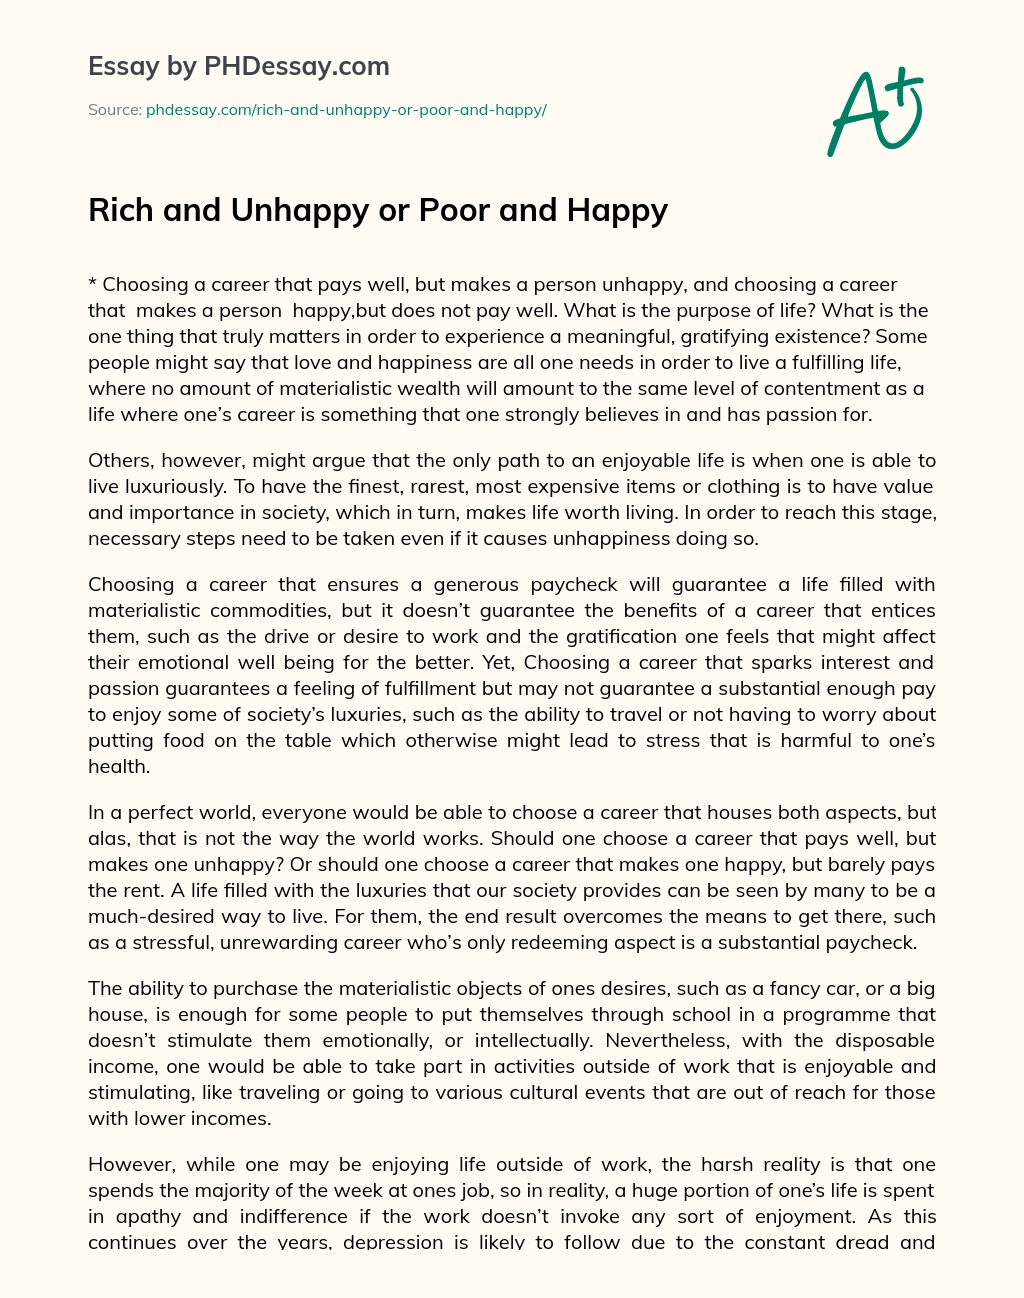 Rich and Unhappy or Poor and Happy essay